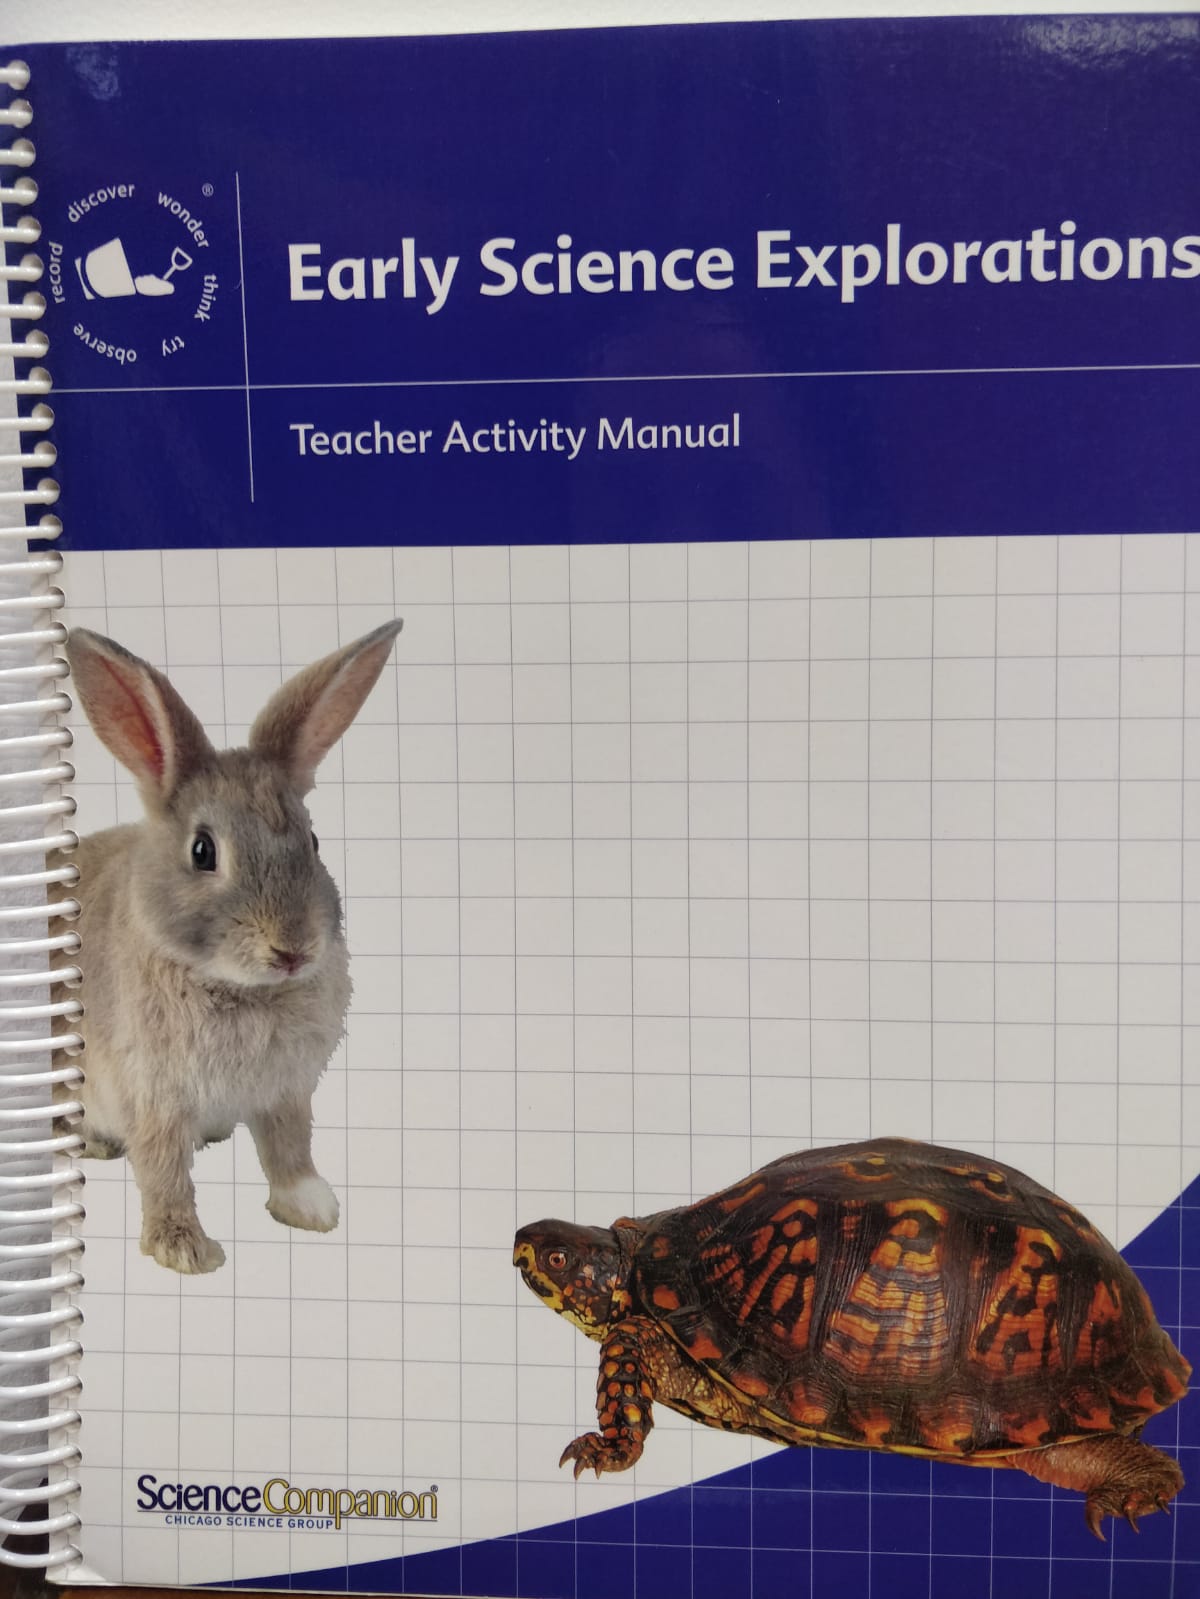 Early Science Explorations